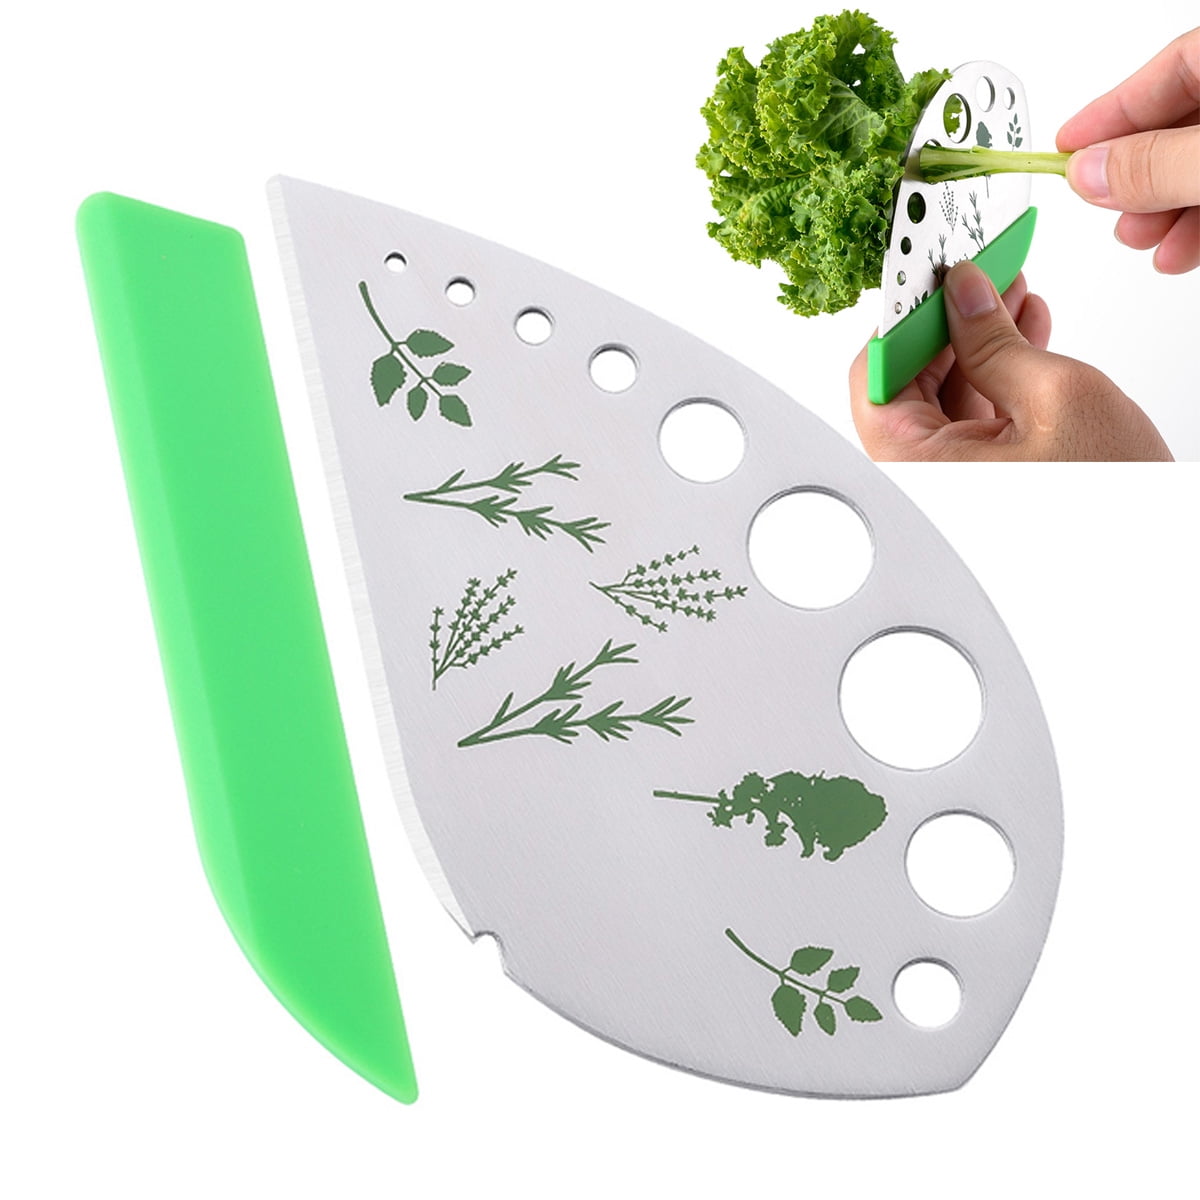 Multifunctions Avocado Leaf Remover Avocado Knife Collard Greens Thyme Basil Stainless Steel Herb Stripper 9 Holes Herb Cutter Rosemary Kale Kitchen Herb Leaf Stripping Tool Herb Stripping 